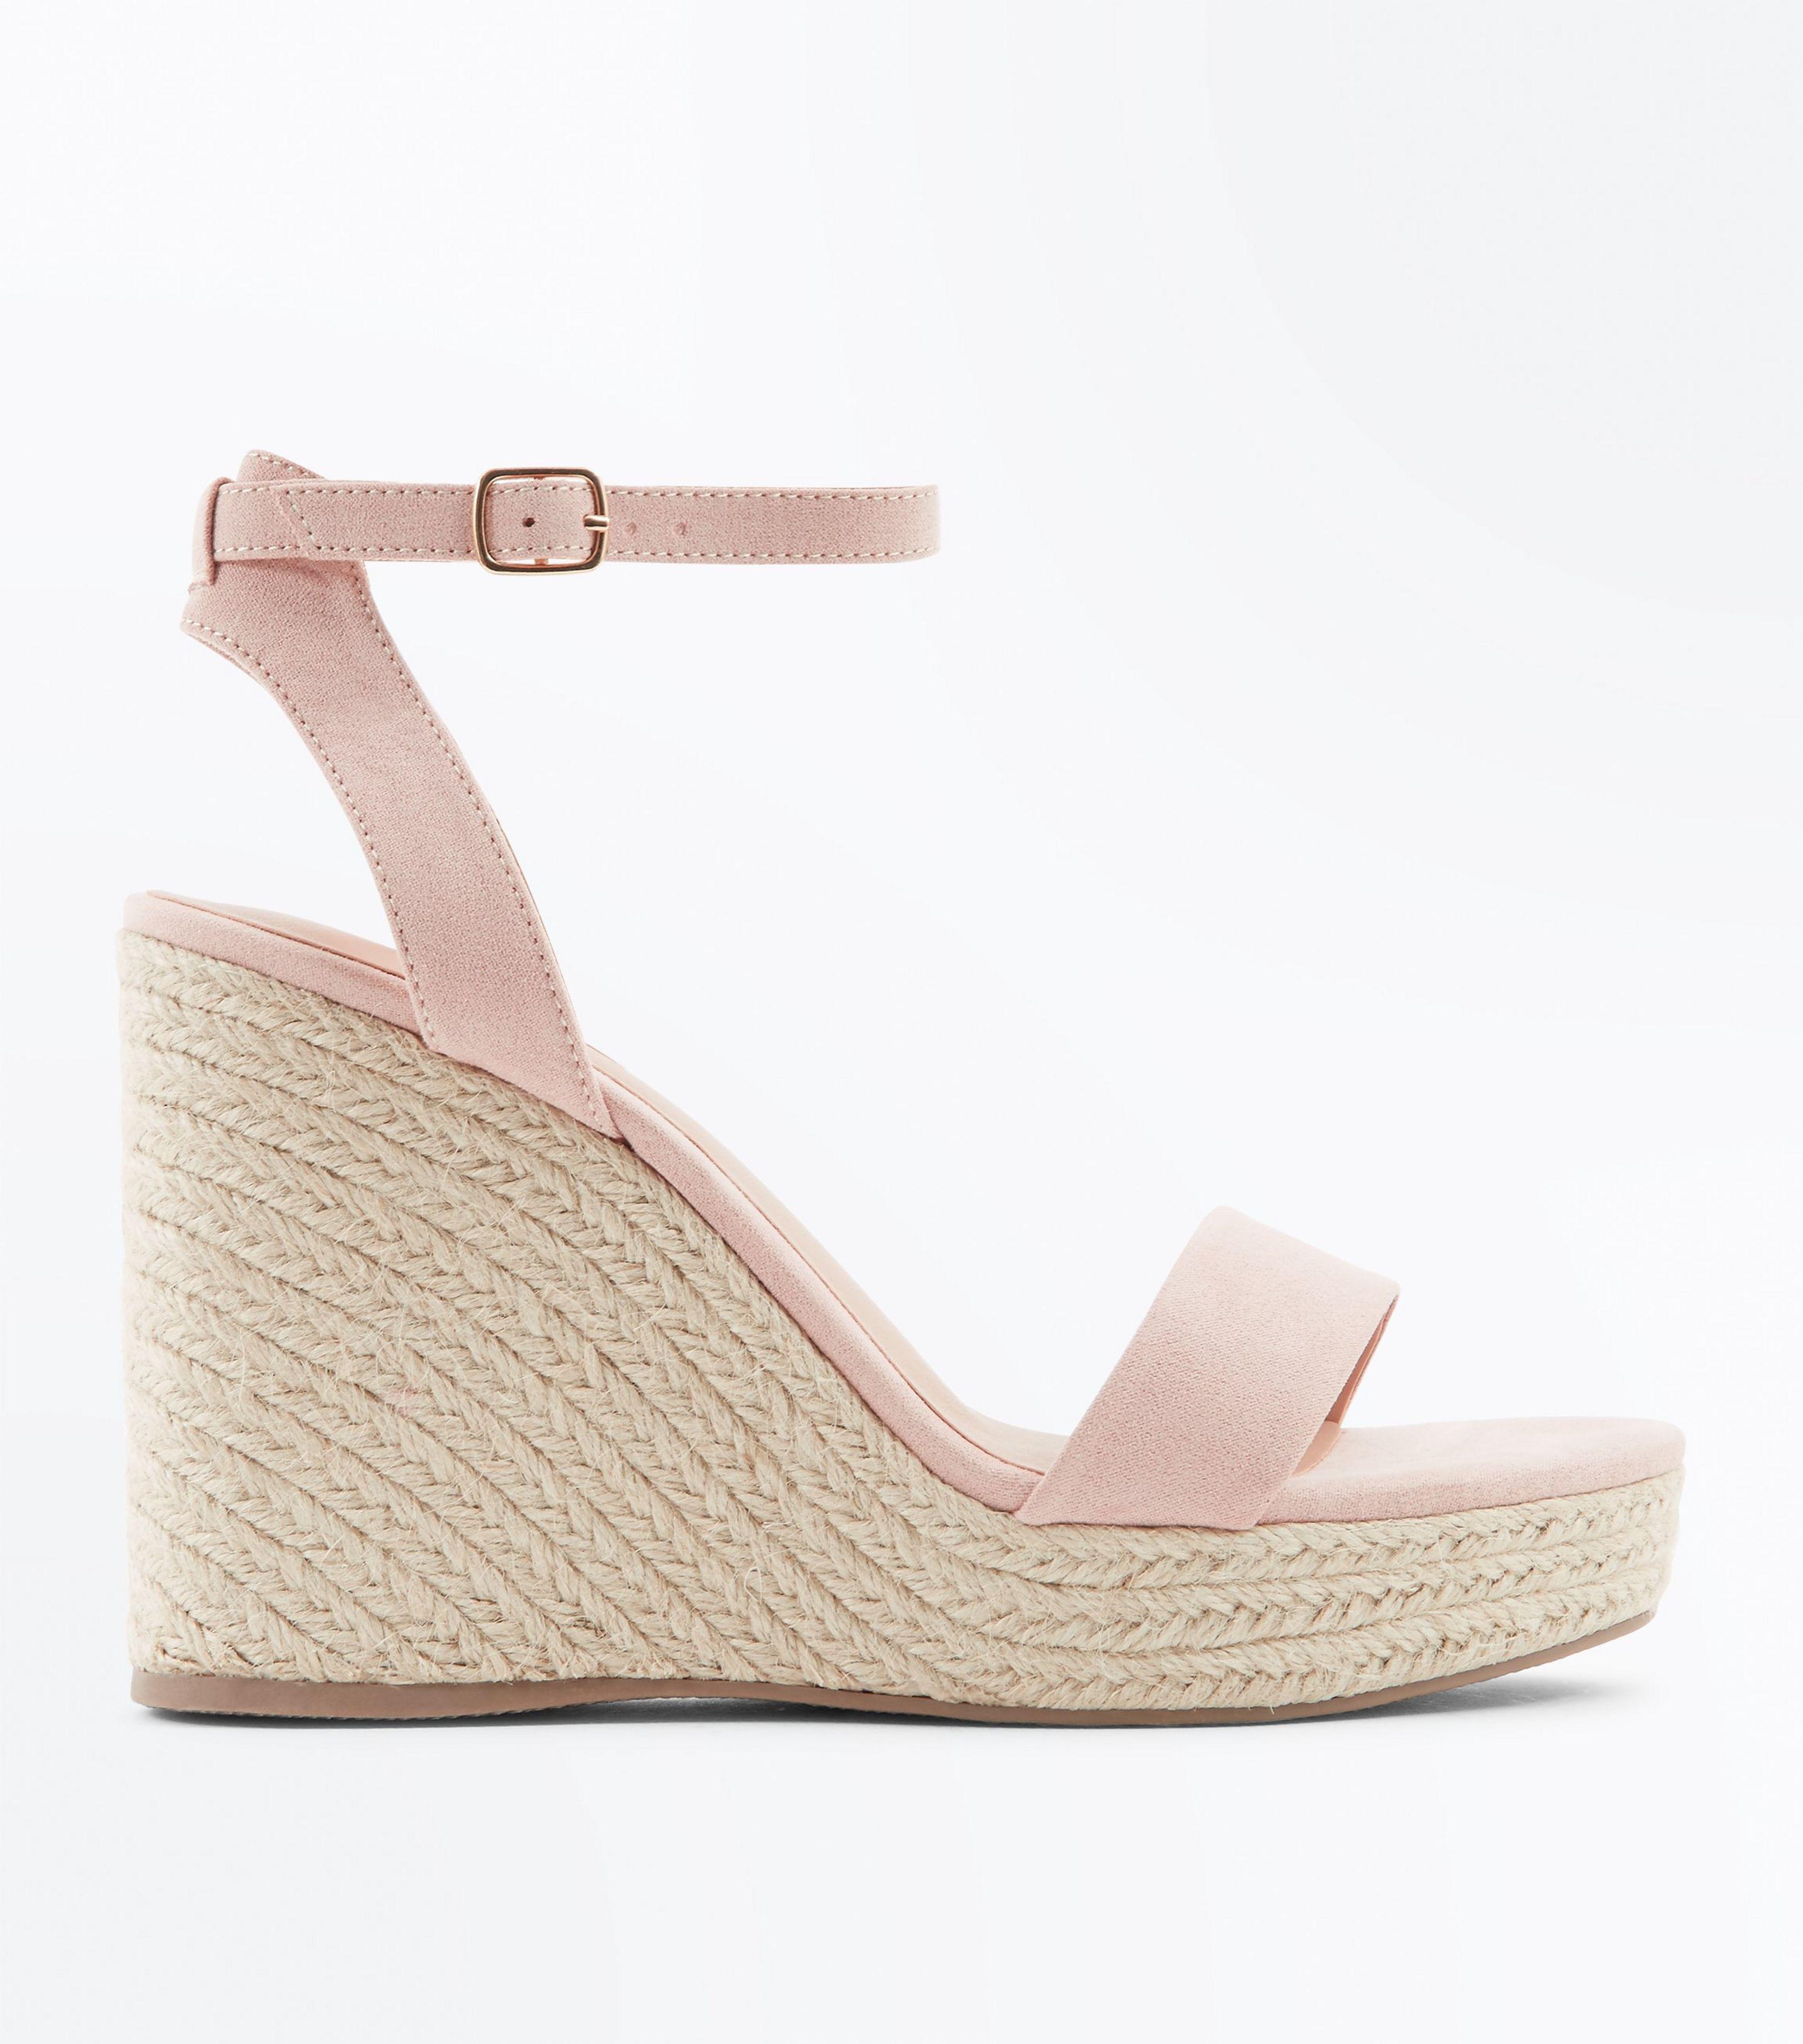 New Look Nude Suedette Ankle Strap Espadrille Wedges in Natural - Lyst